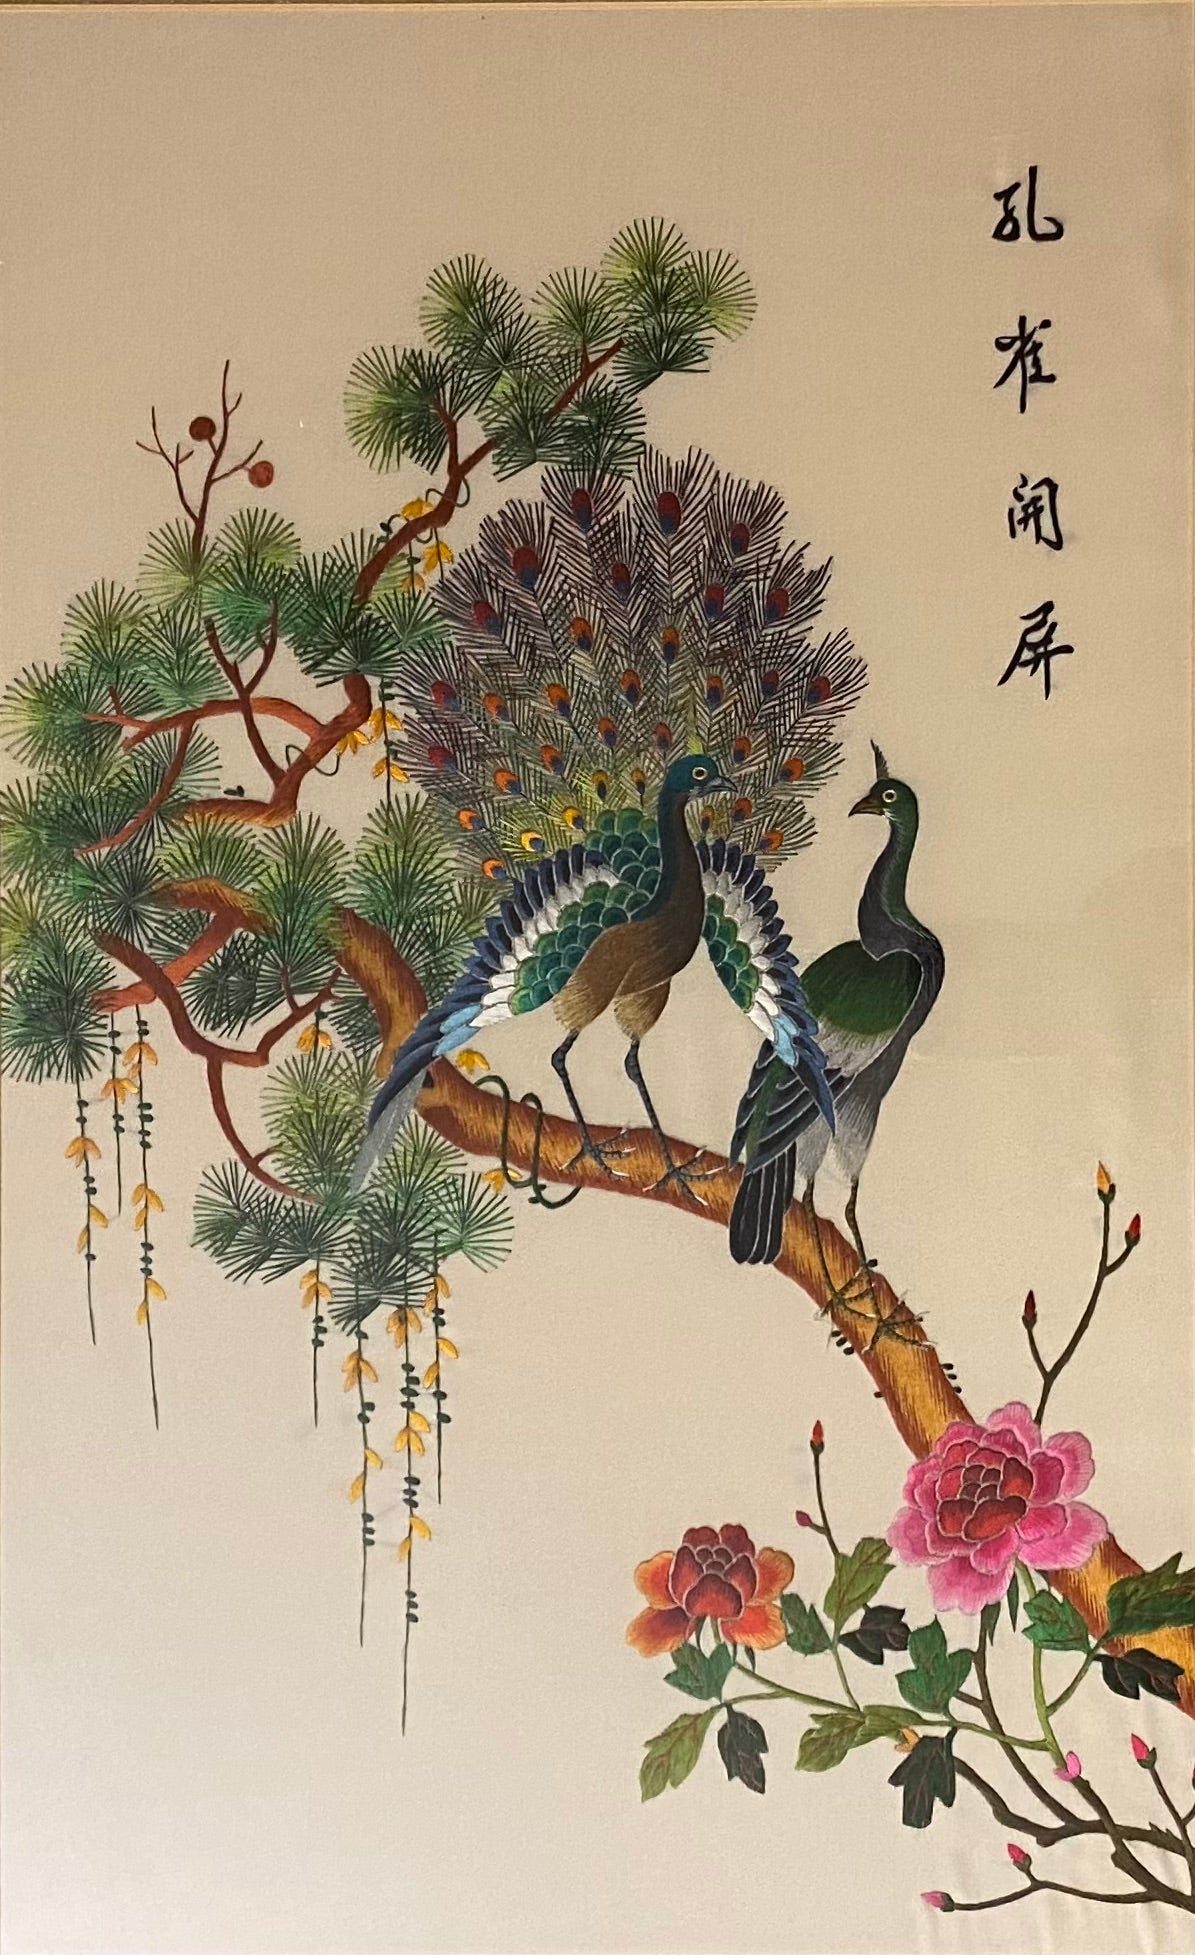 Original signed artwork of Suzhou embroidery and its important to Chinese culture as an art form. 

Stunningly beautiful and traditional work in this vintage silk thread wall art of flora and fauna. Each stitch is hand crafted with meticulous and